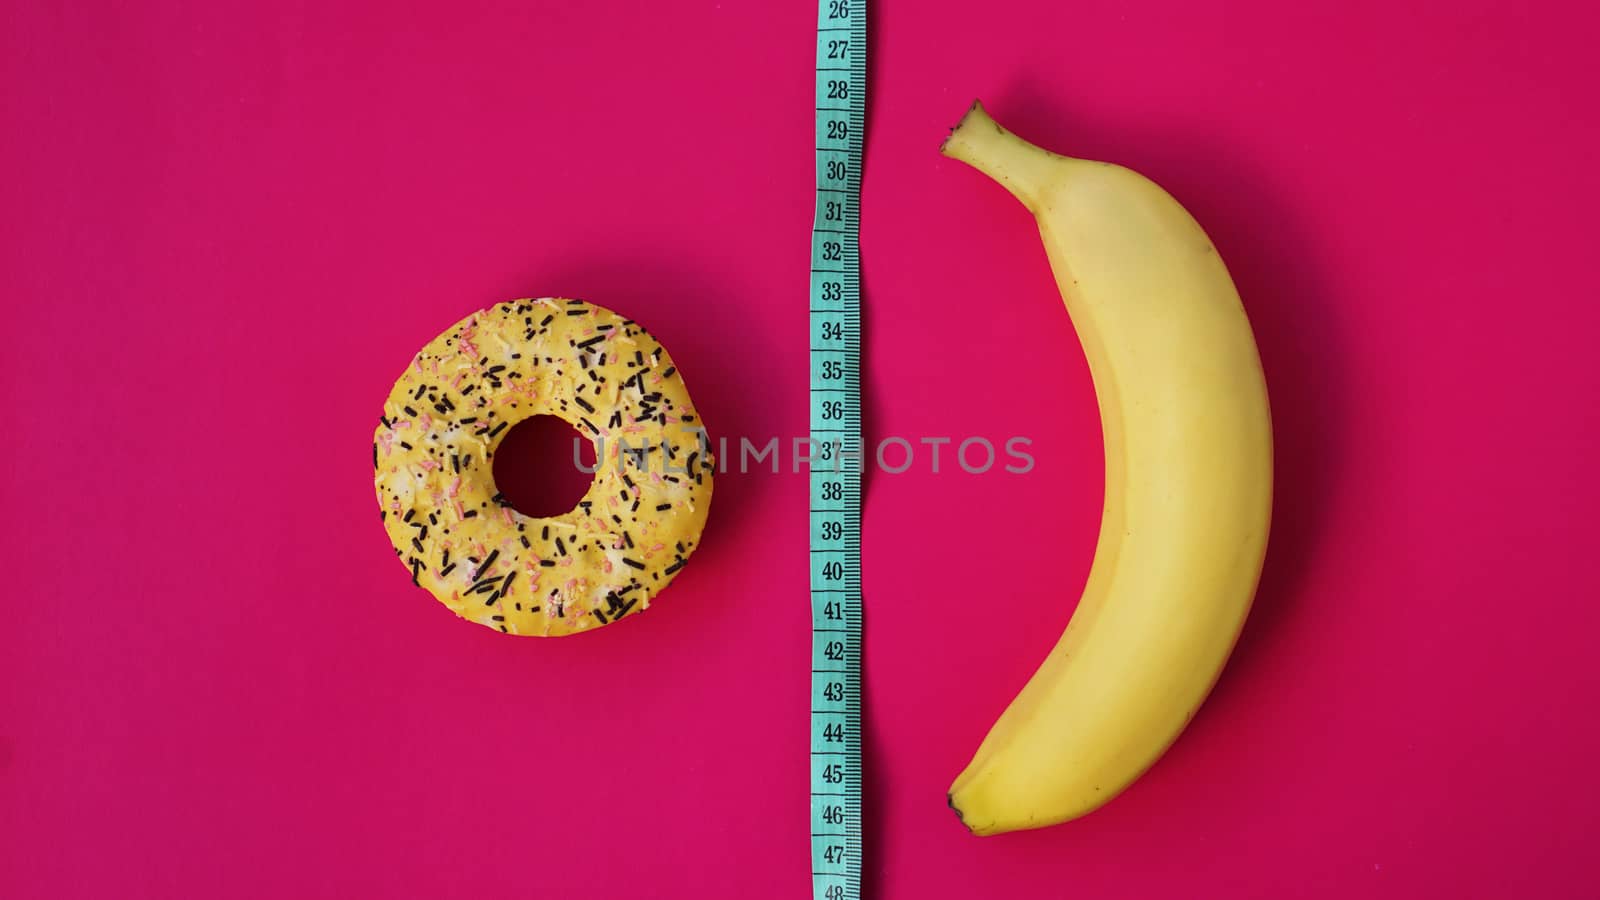 Two types of food, healthy and unhealthy, banana and donut, diet and obesity, health concept on a pink background